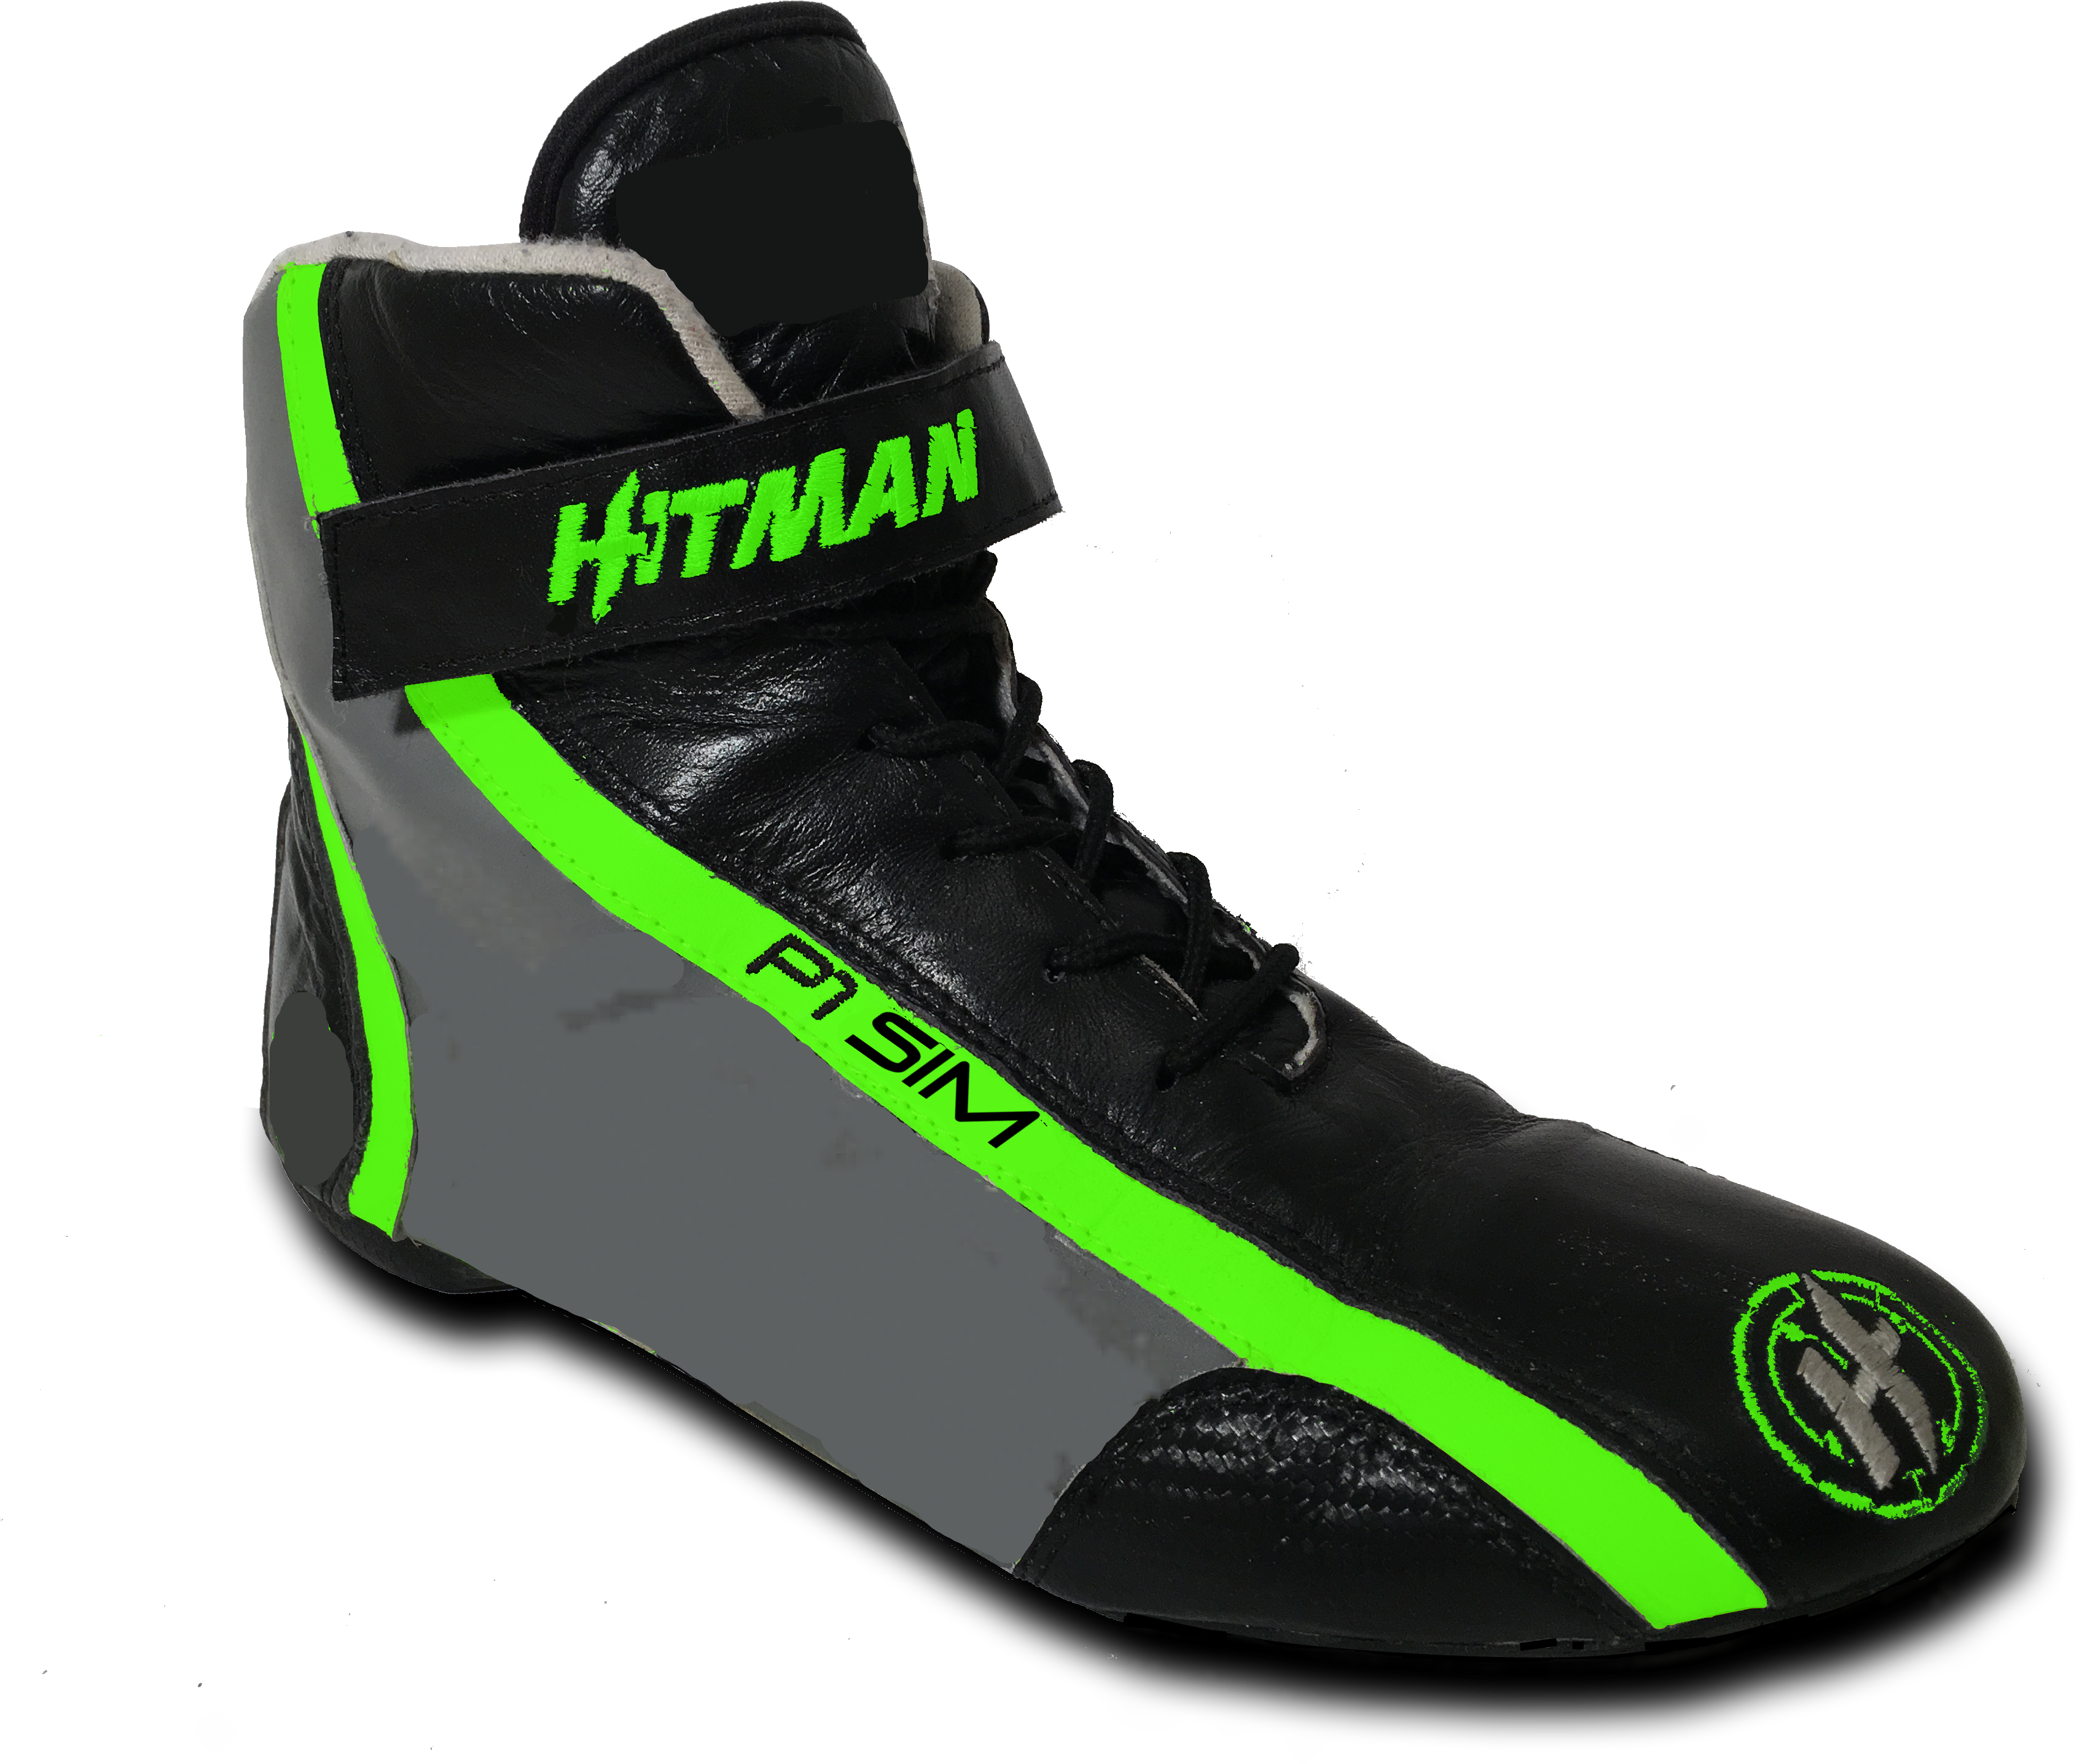 neon green wrestling shoes